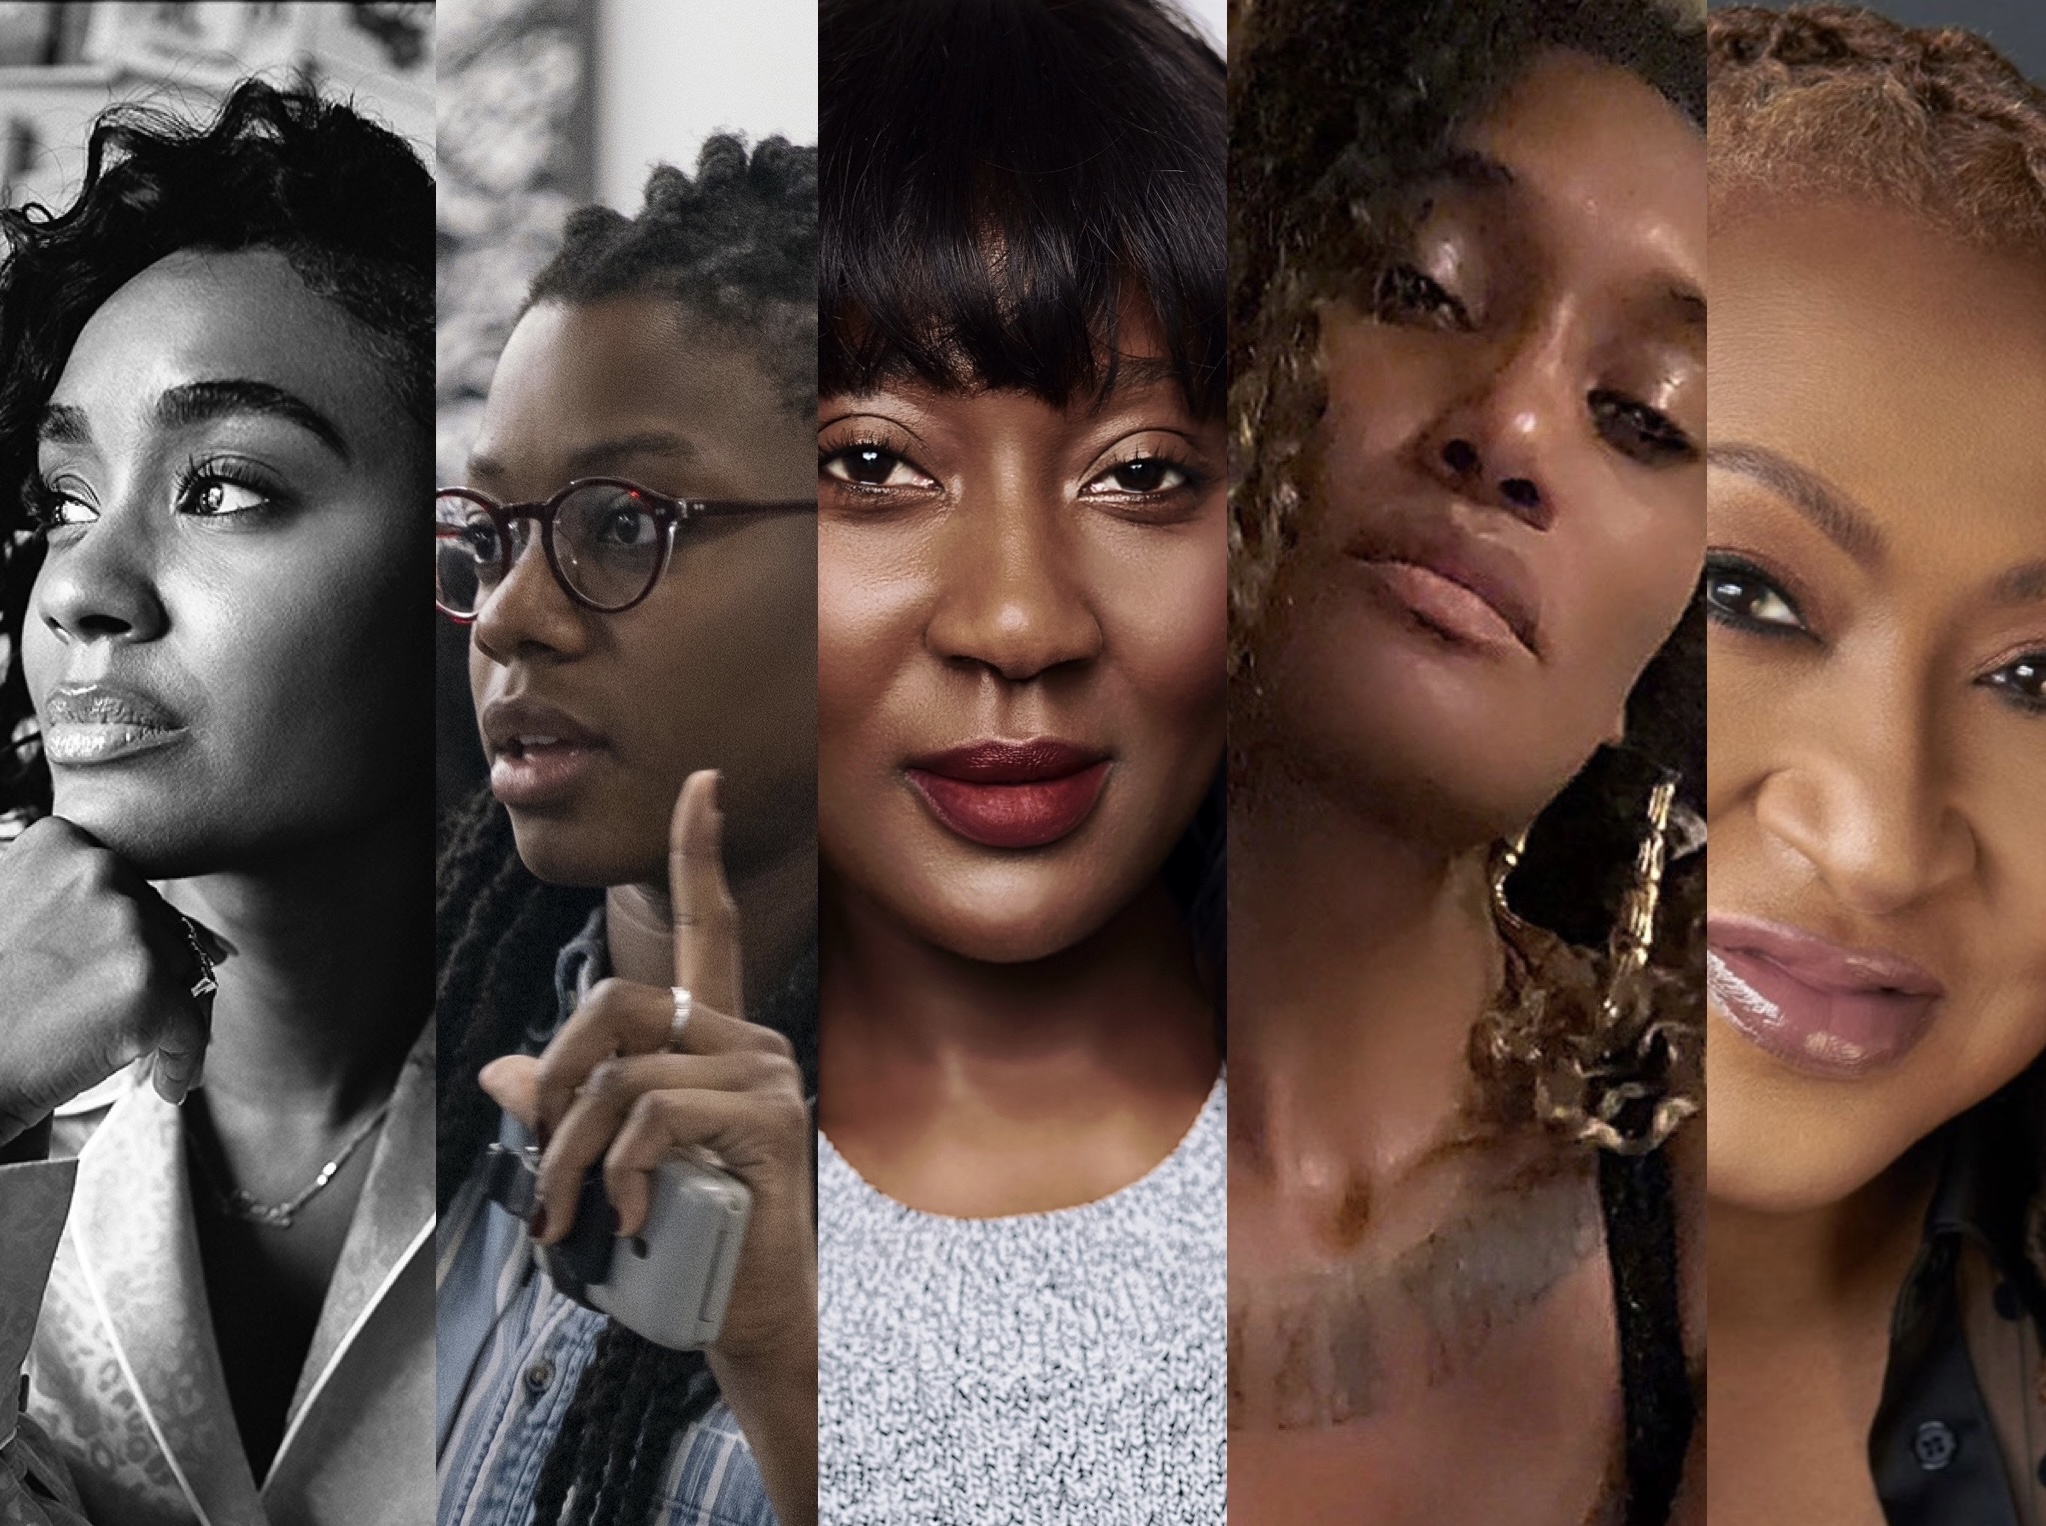 Calling the shots: 5 Black female movie directors to watch in 2023